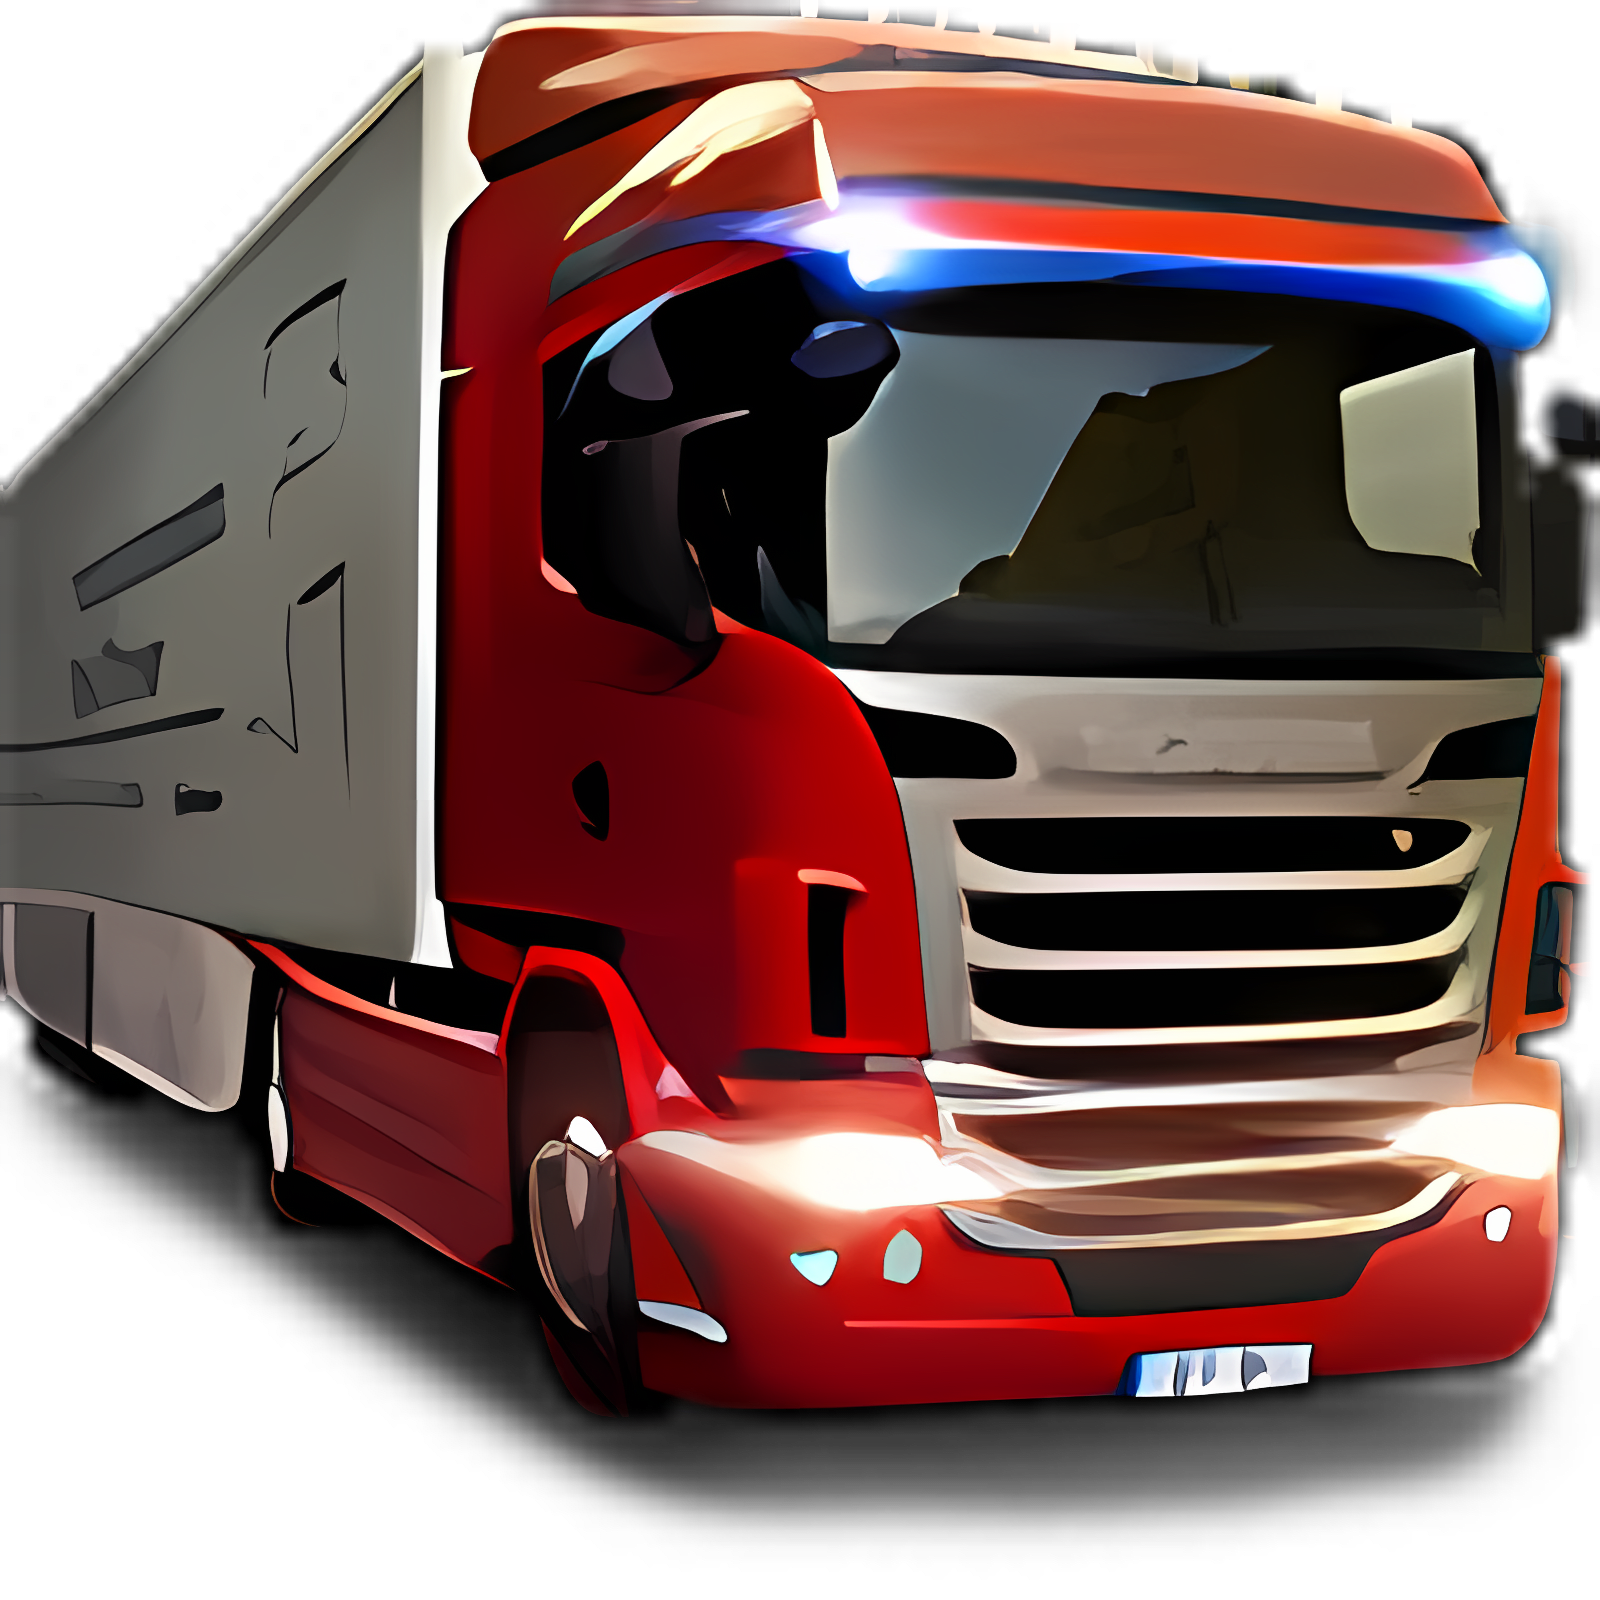 Download Scania Truck Driving Simulator Install Latest App downloader